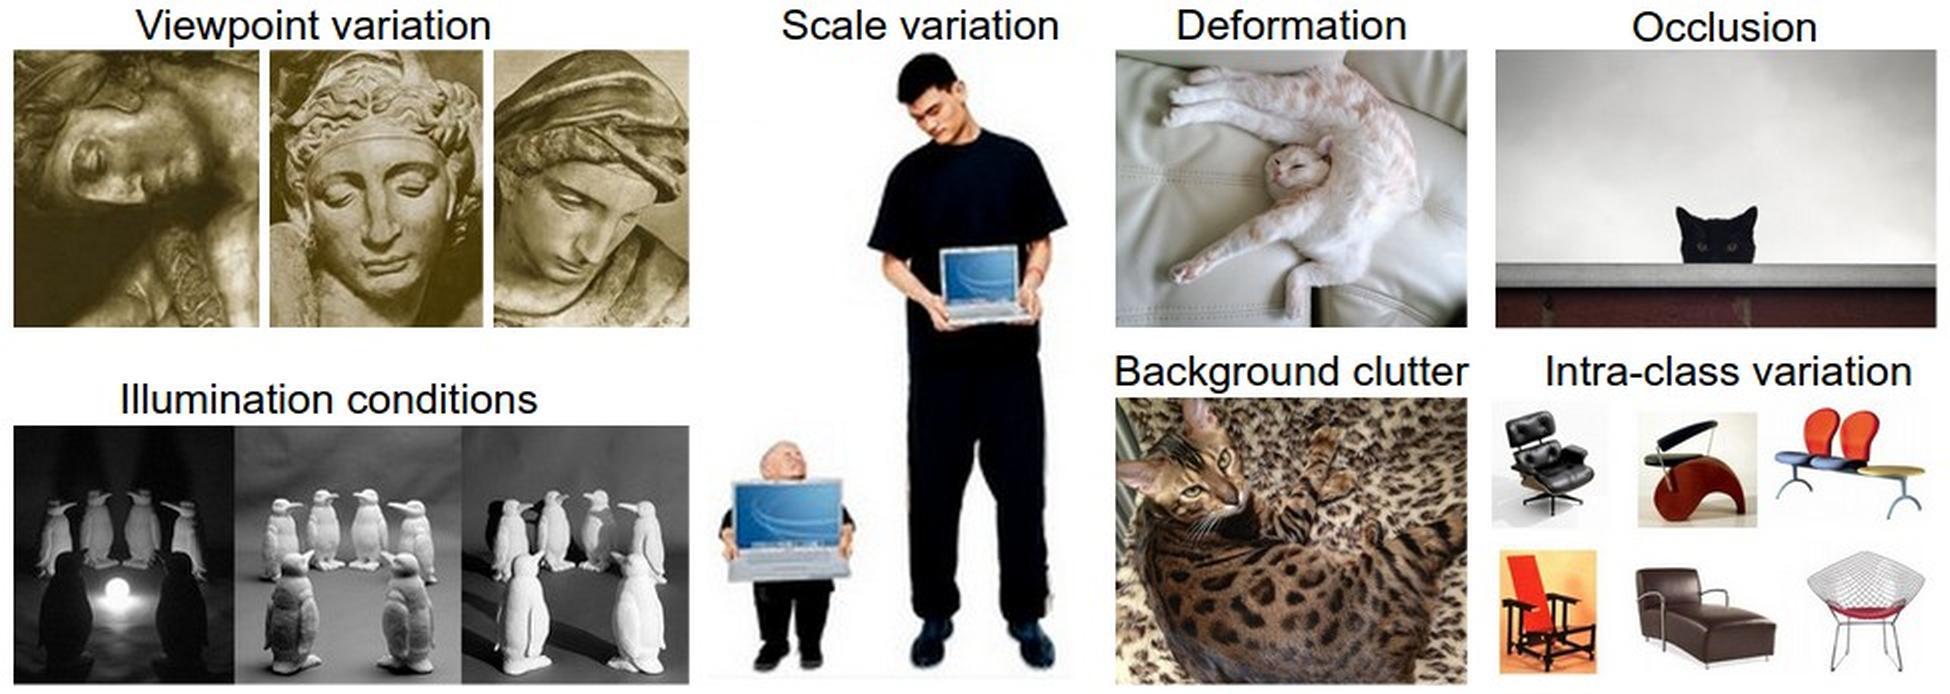 Some of the challenges in getting a computer to classify images. (Reproduced from CS231n notes.)